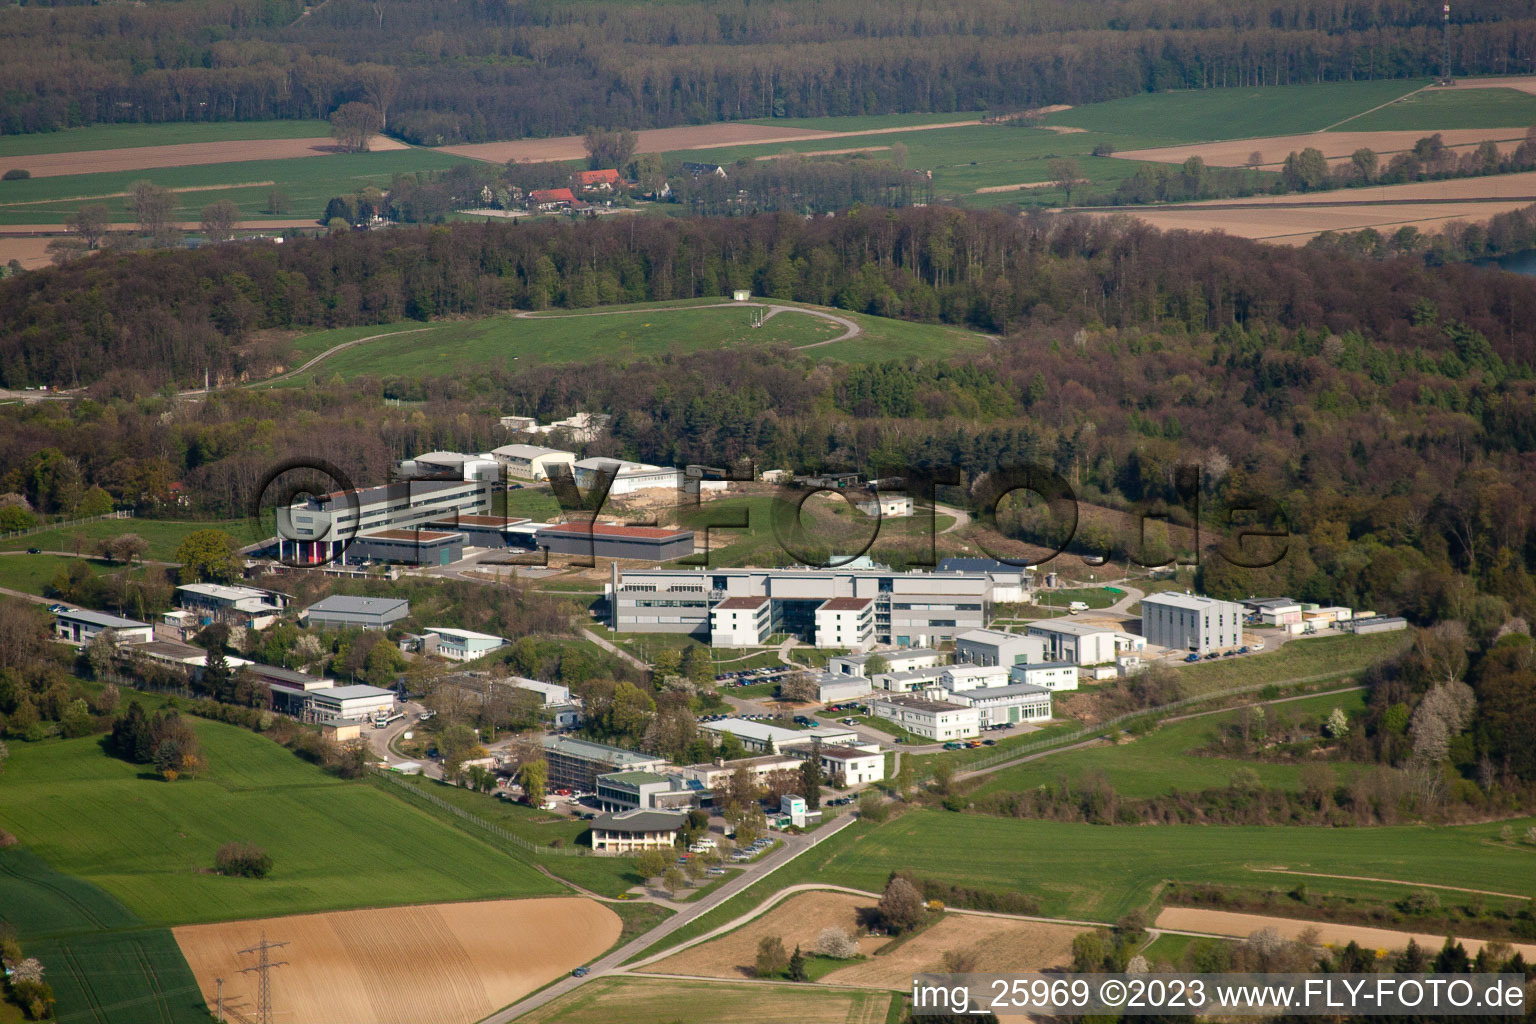 Aerial view of Pfinztal, Fraunhofer Institute for Chemical Technology (ICT) in the district Grötzingen in Karlsruhe in the state Baden-Wuerttemberg, Germany